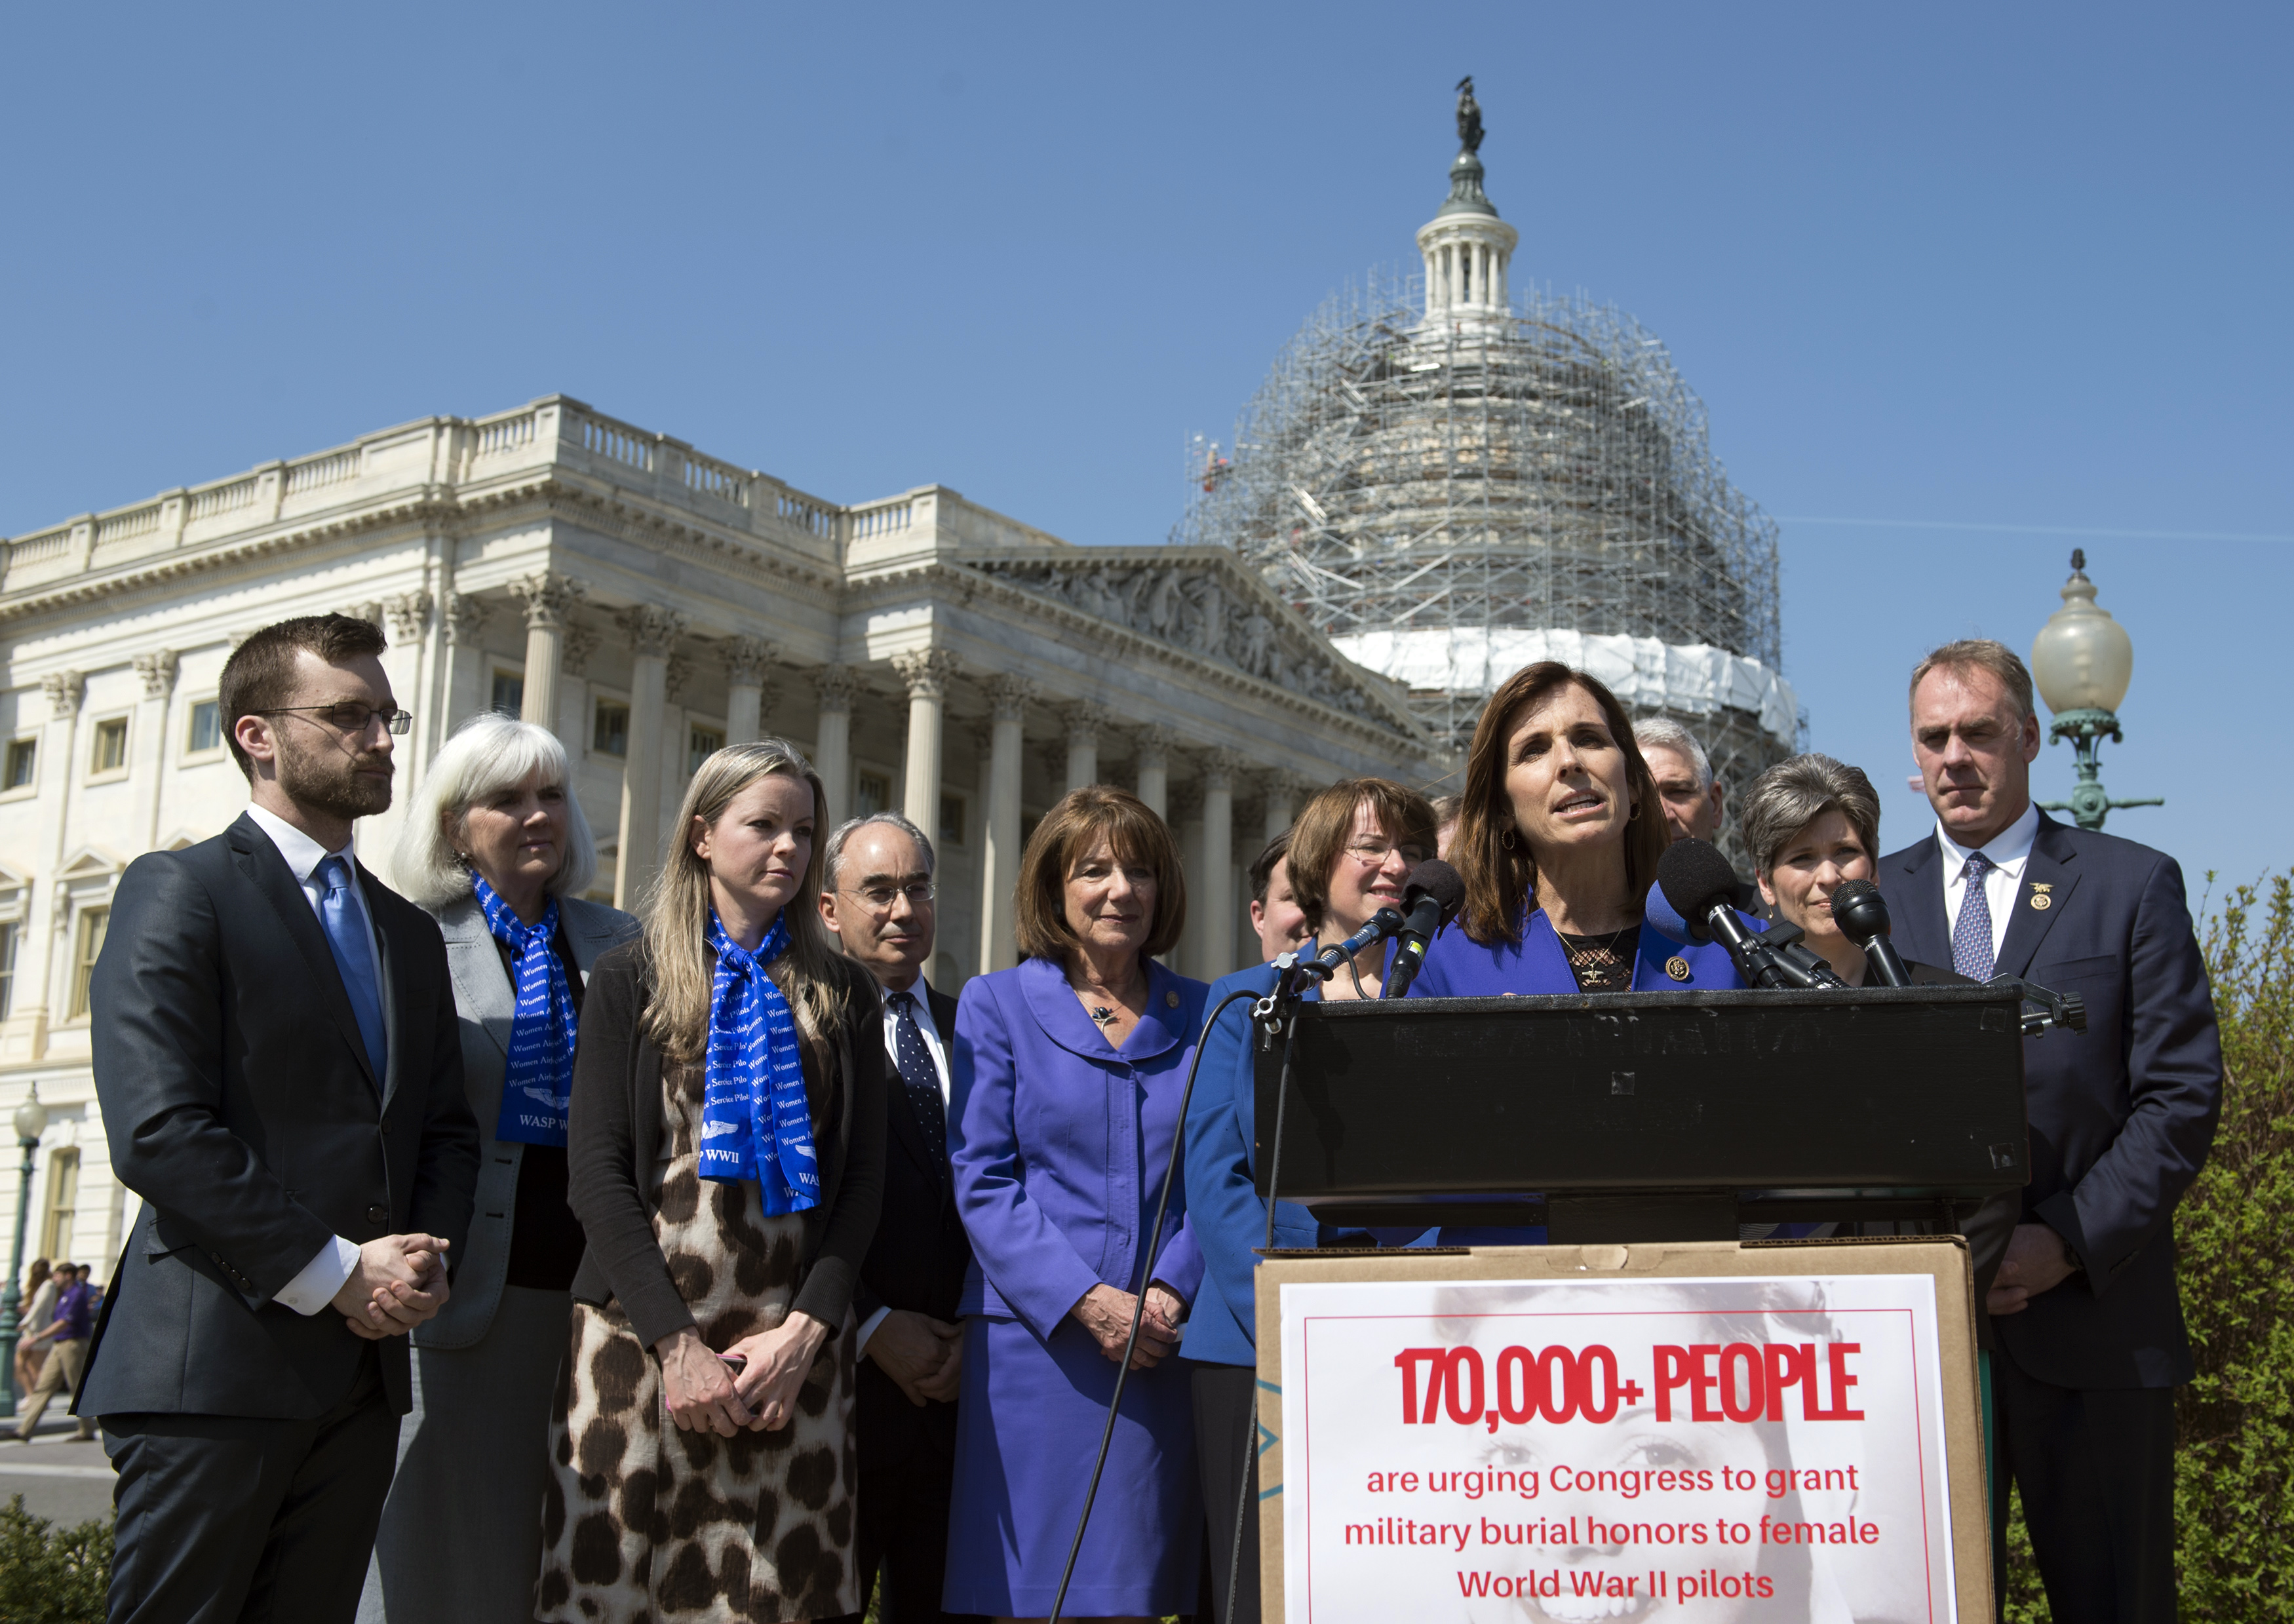 Rep. Martha McSally, R-Ariz., speaks during an event on the reinstatement of WWII female pilots at Arlington National Cemetery on Capitol Hill in Washington, Wednesday, March 16, 2016. Joining the effort are Terry Harmon, second from left, daughter of WWII veteran WASP (Women Airforce Service Pilots) Elaine Harmon and Erin Miller, third from left, granddaughter of Elaine Harmon. Arlington National Cemetery approved in 2002 active duty designees, including WASP pilots, for military honors and inurnments. However, in March 2015, then-Secretary of the Army John McHugh reversed this decision. (AP Photo/Molly Riley)